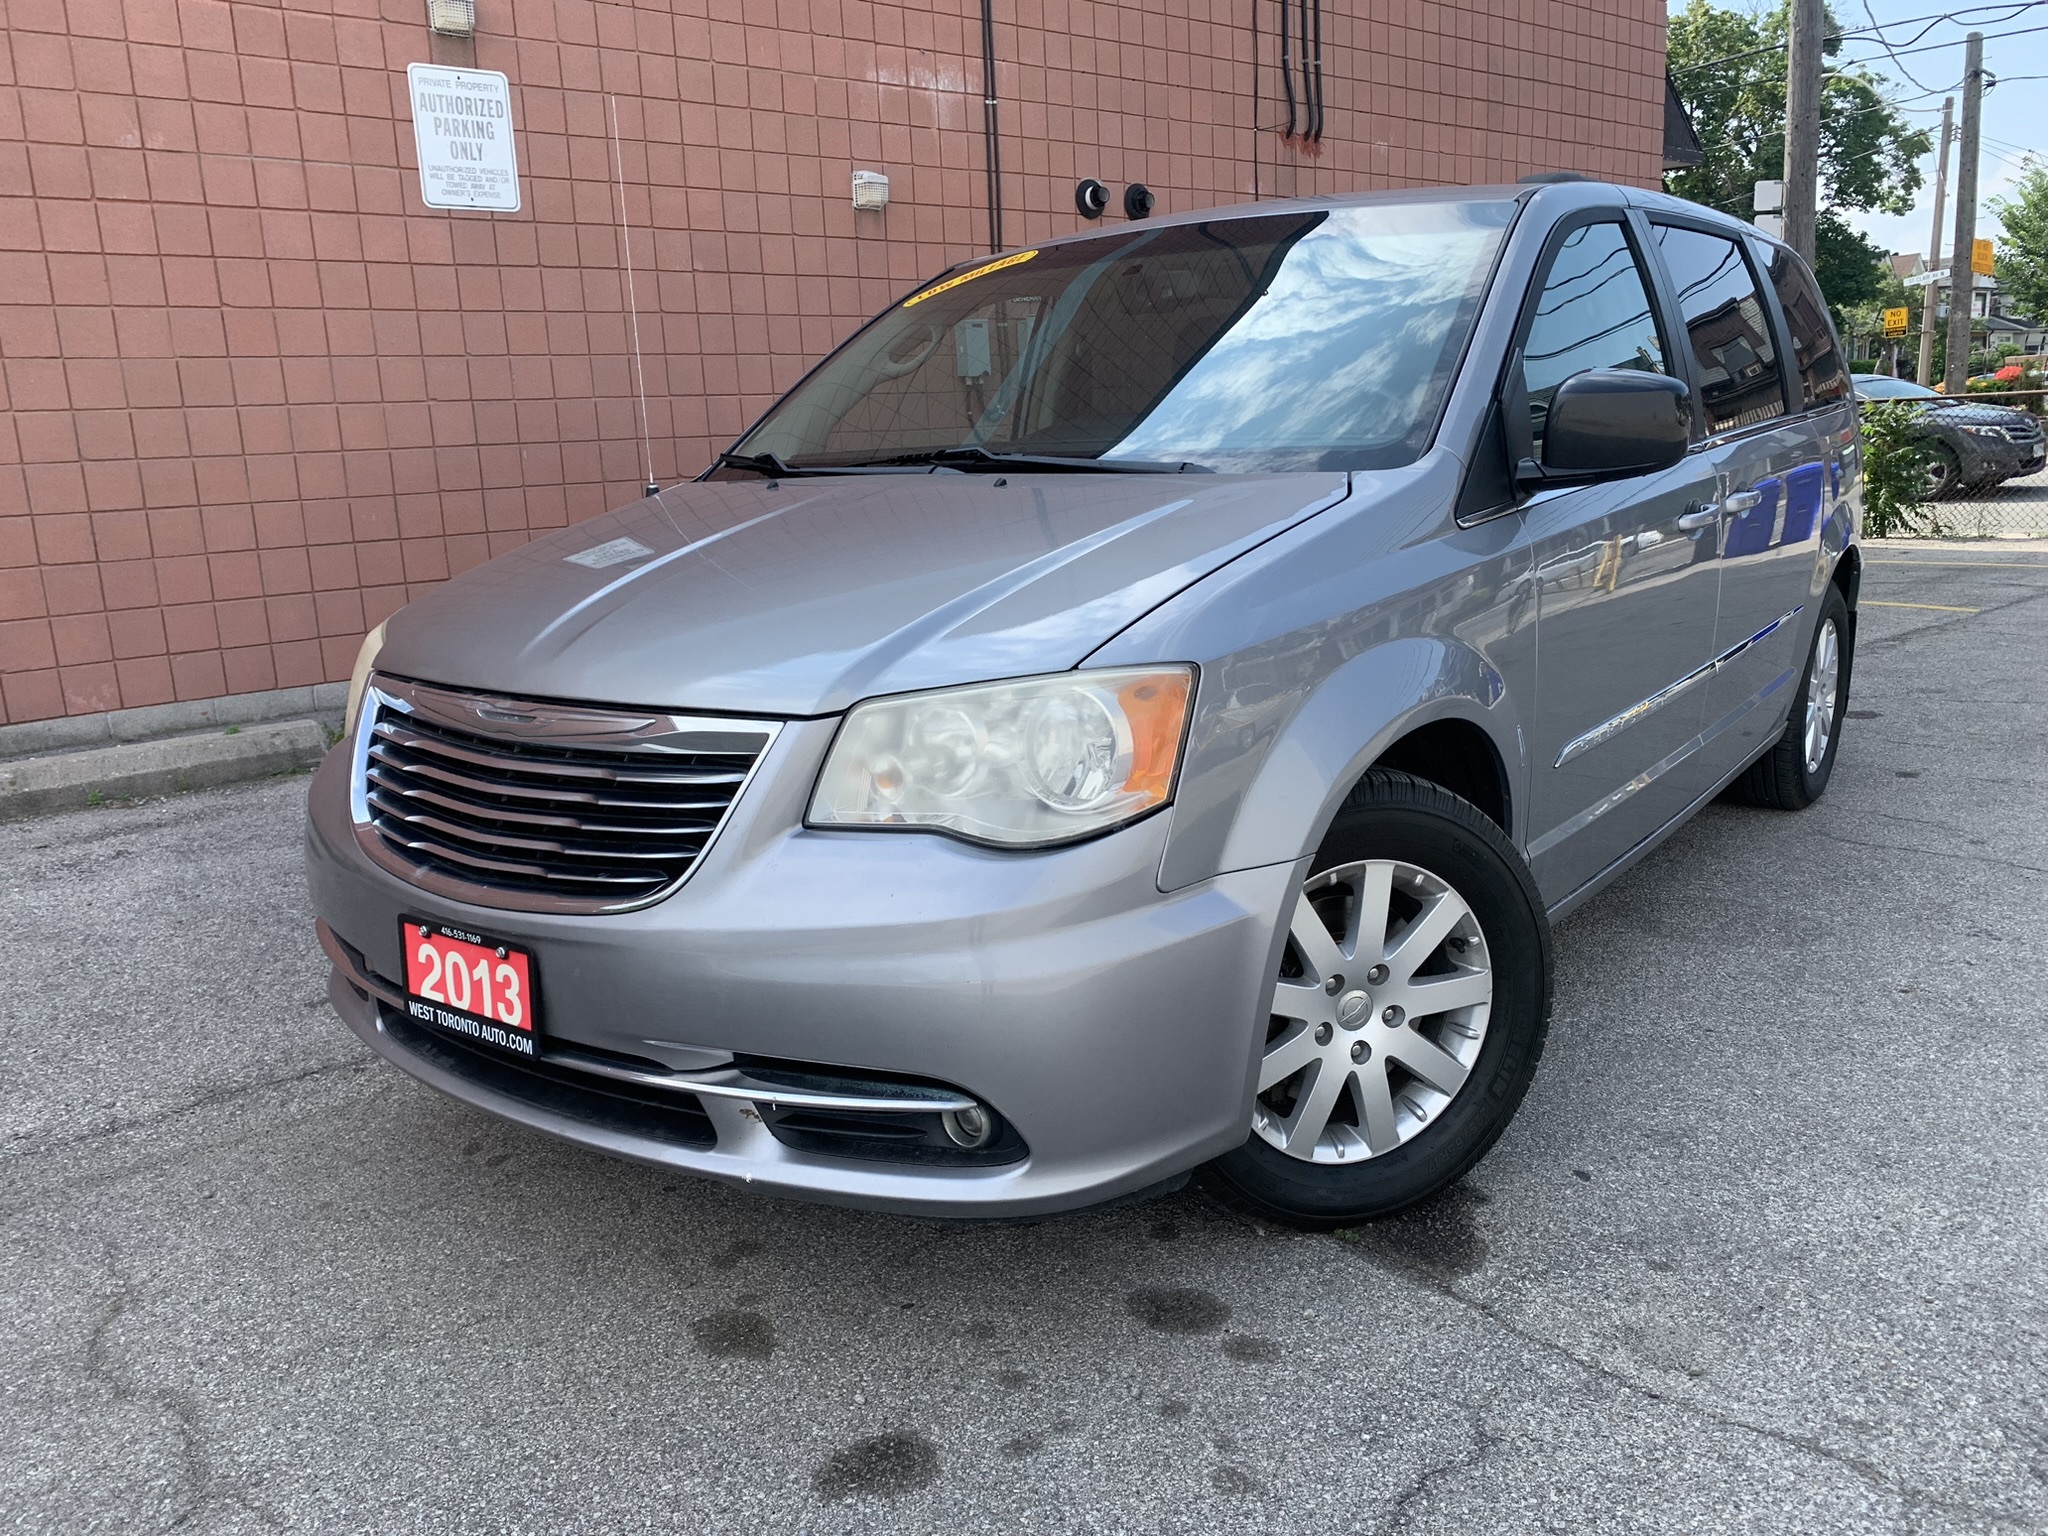 2013 Chrysler Town & Country !!!!! SOLD SOLD SOLD !!!TOURING / 128161 KMS !!!! 